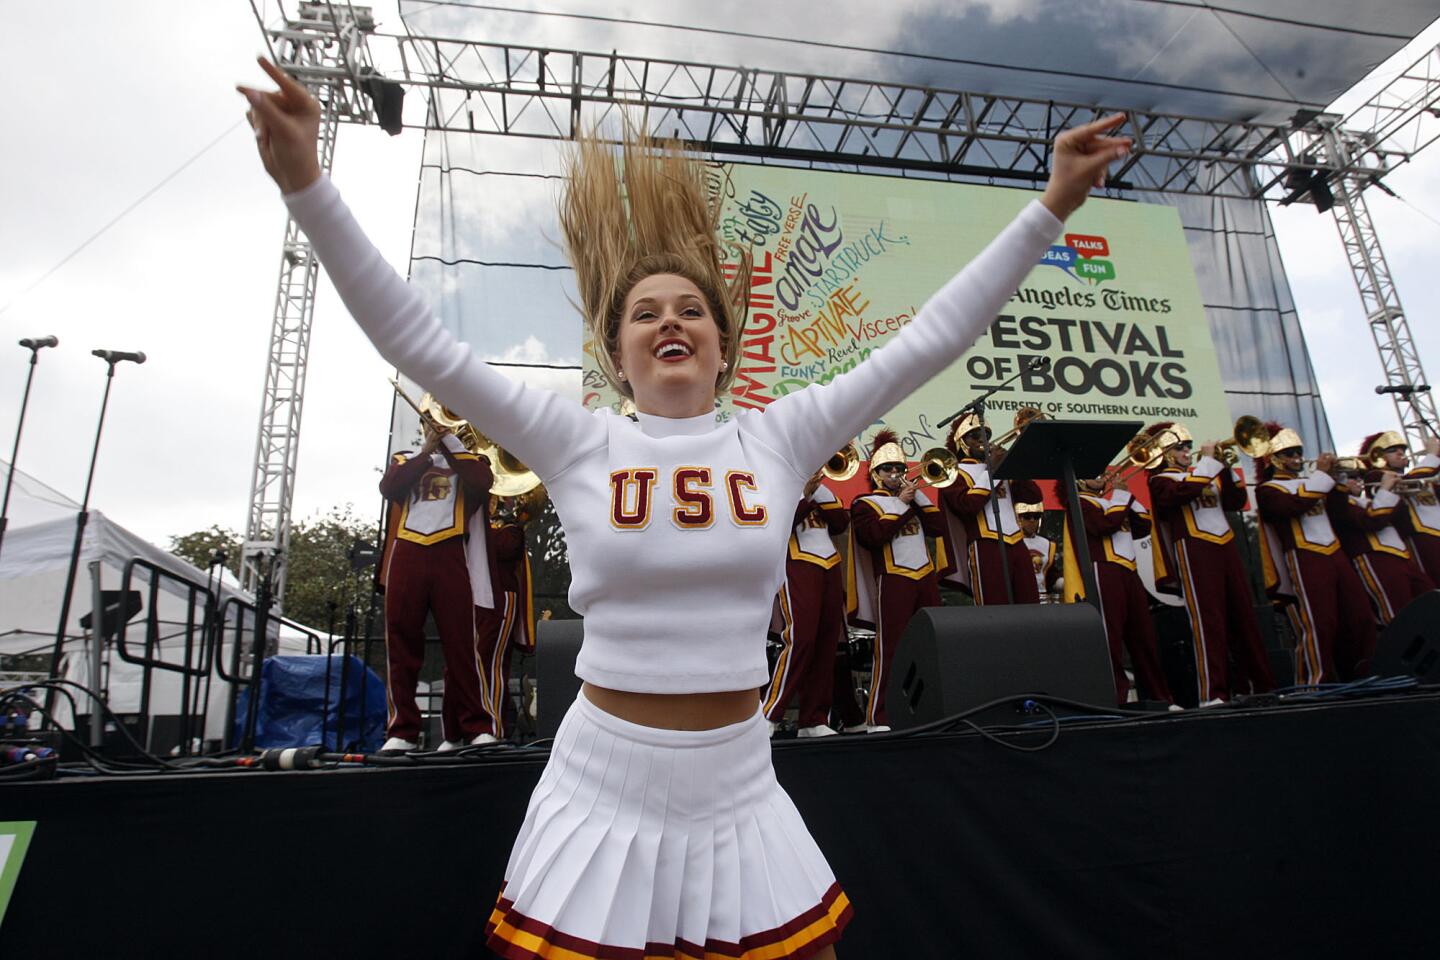 The USC marching band performs along with the USC Song Girls during the kickoff of the Los Angeles Times Festival of Books on Saturday.